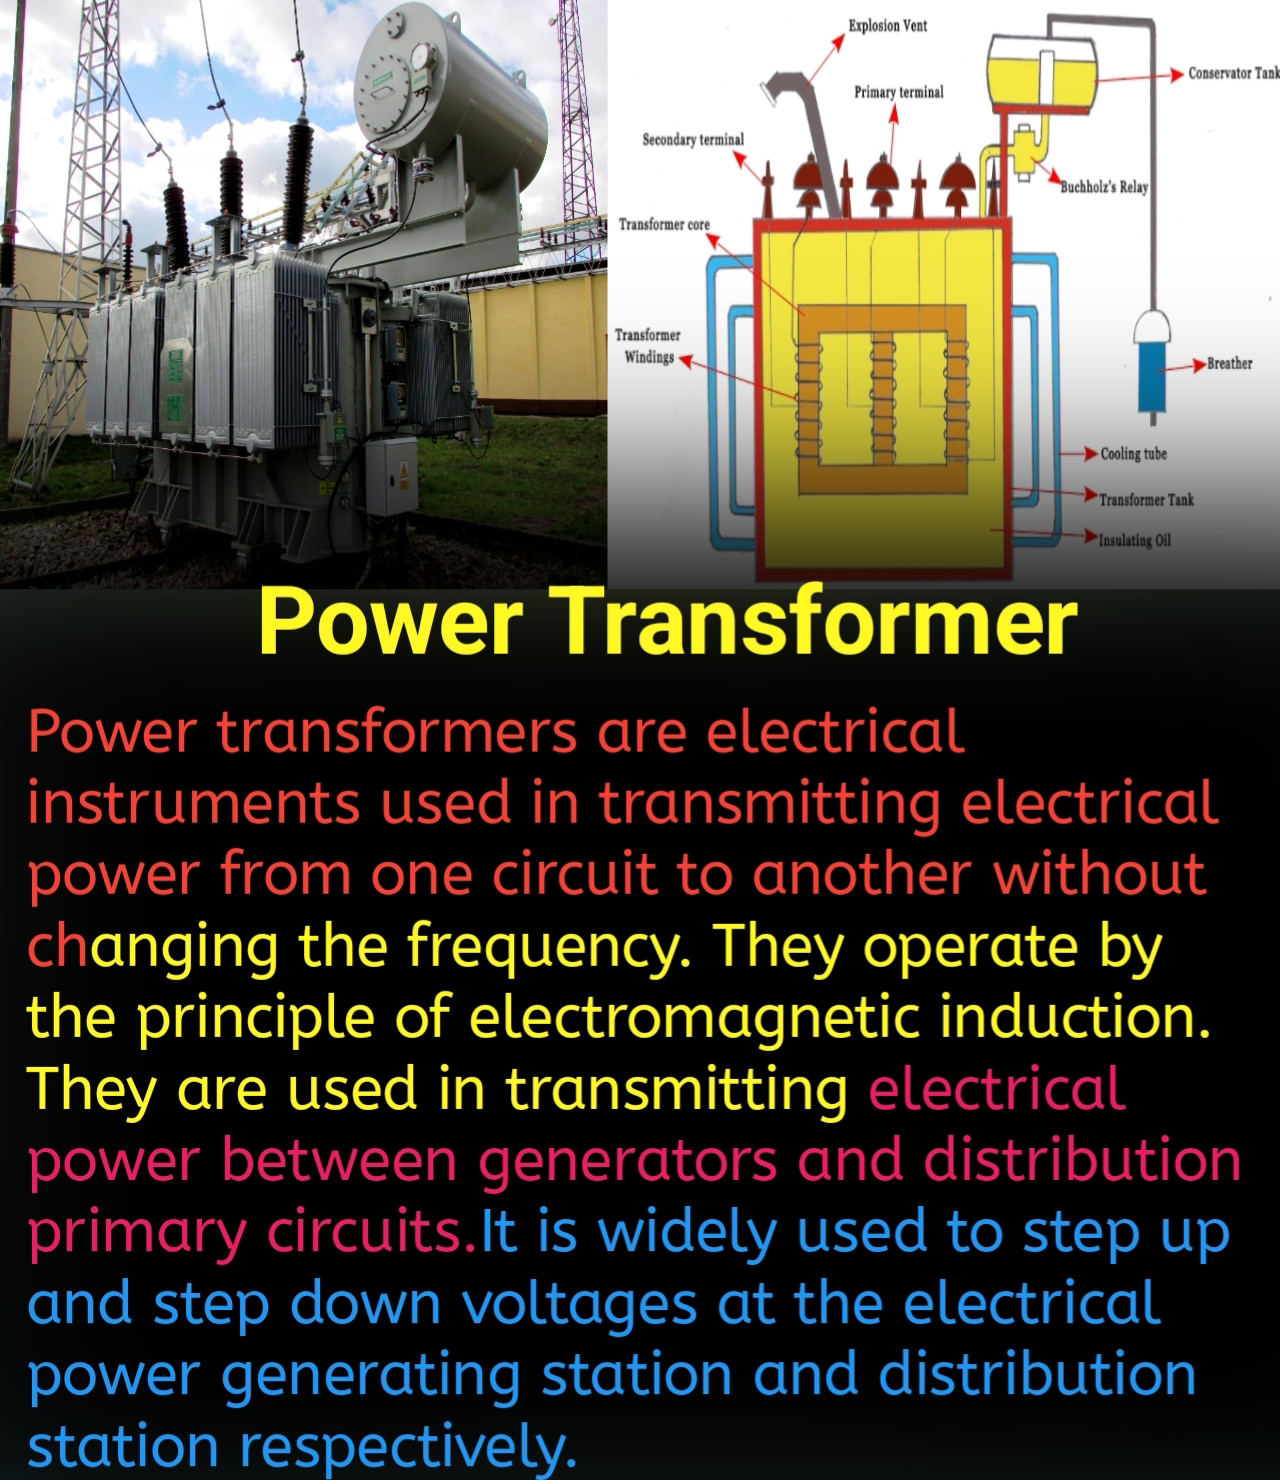 Types of Transformers and Their Applications